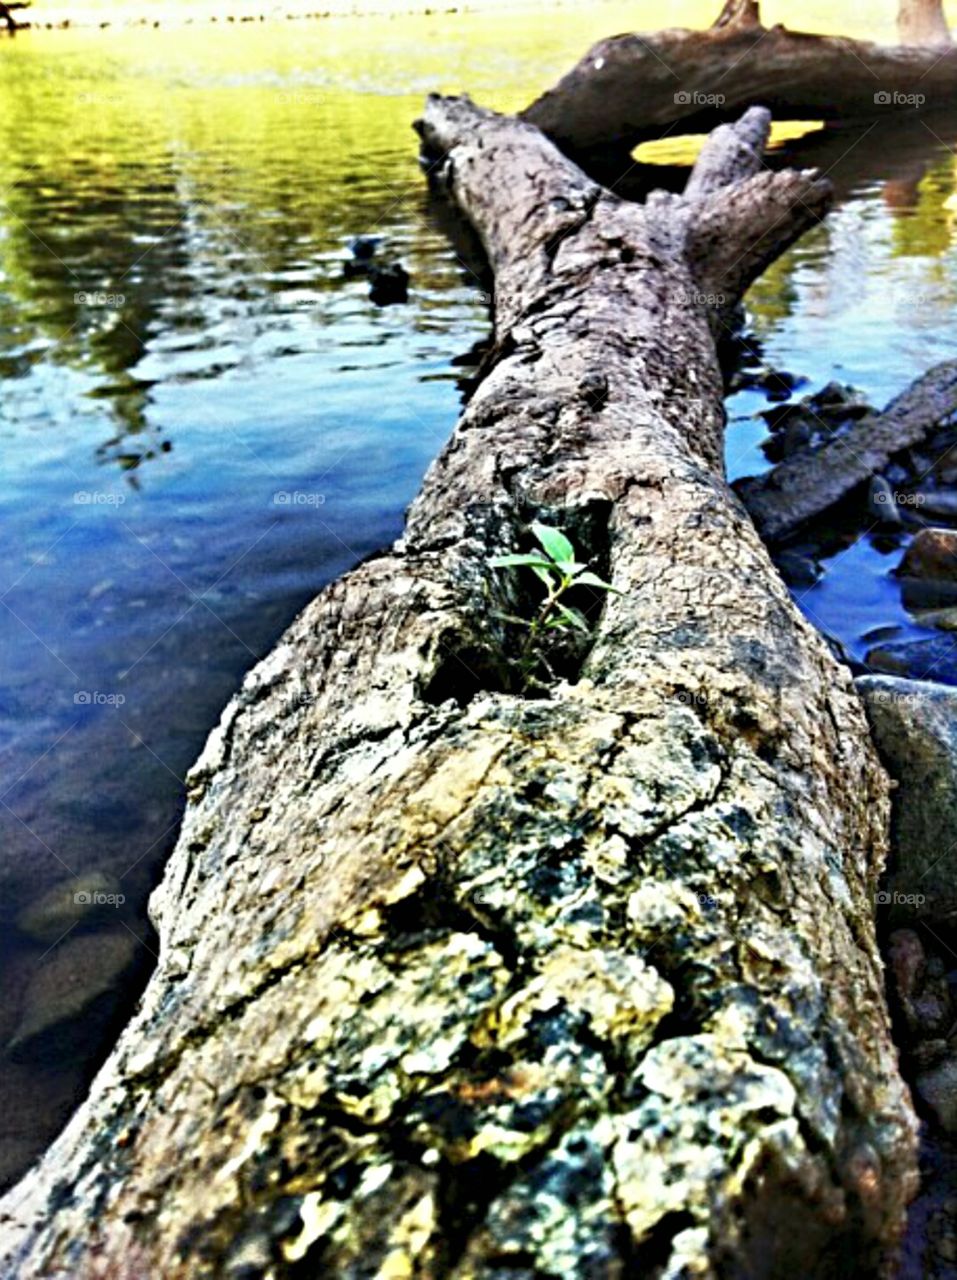 Life after Death on the Brazos. An old tree that had died and fallen over in the shallow area of the Brazos River aids in the growth of a new tree. 